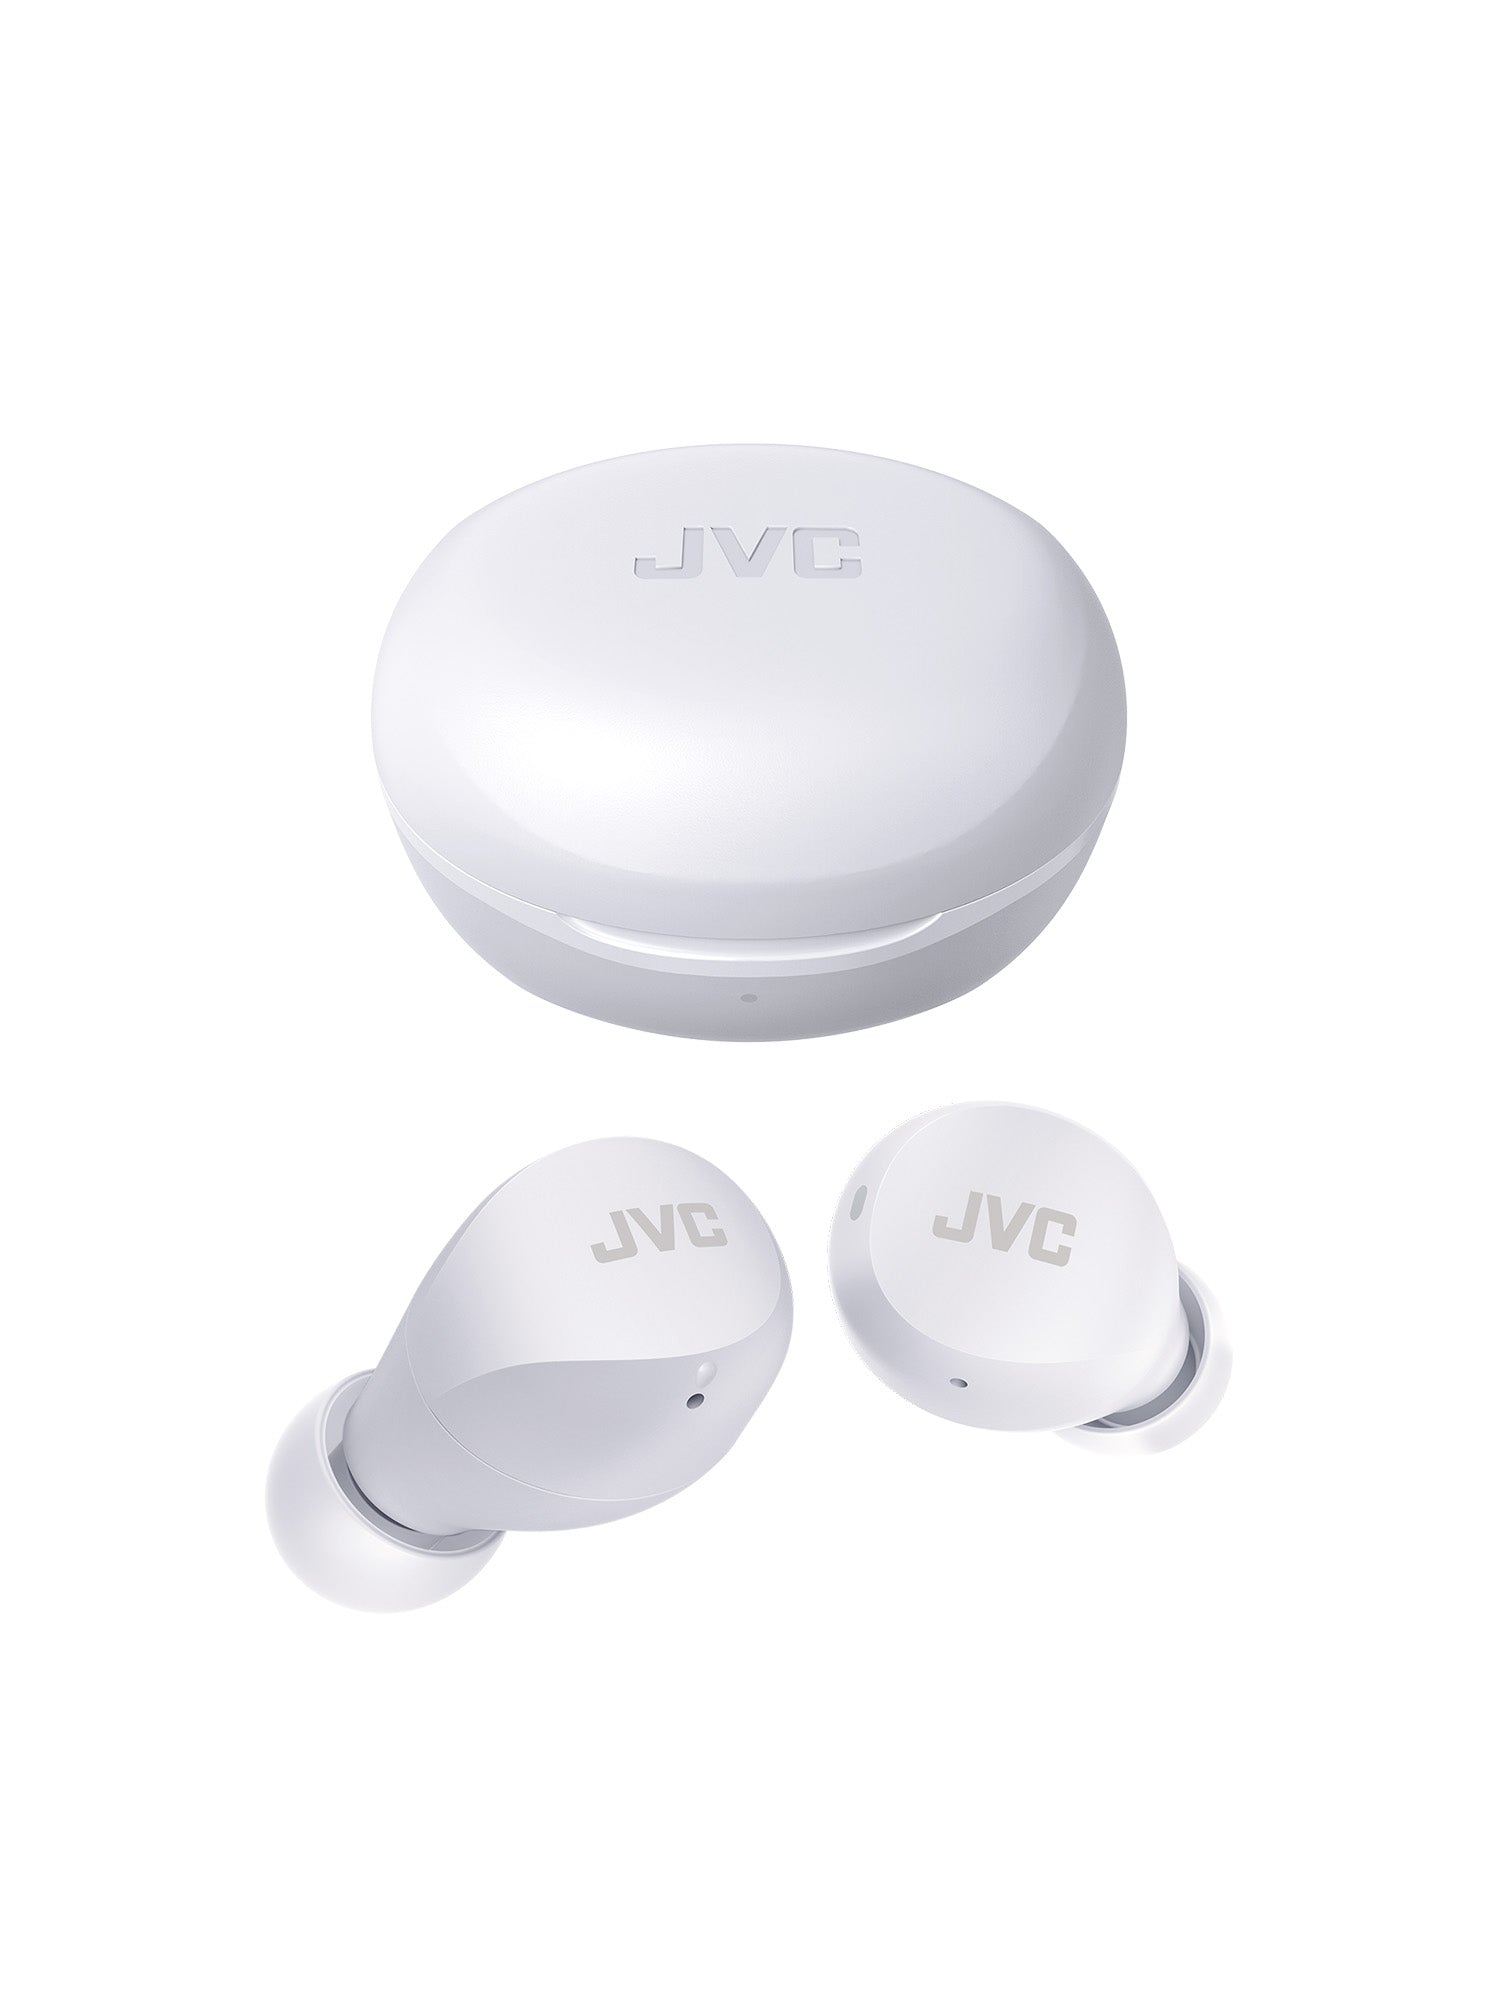 HA-A6T-W in White Gumy mini wireless earbuds & charger by JVC